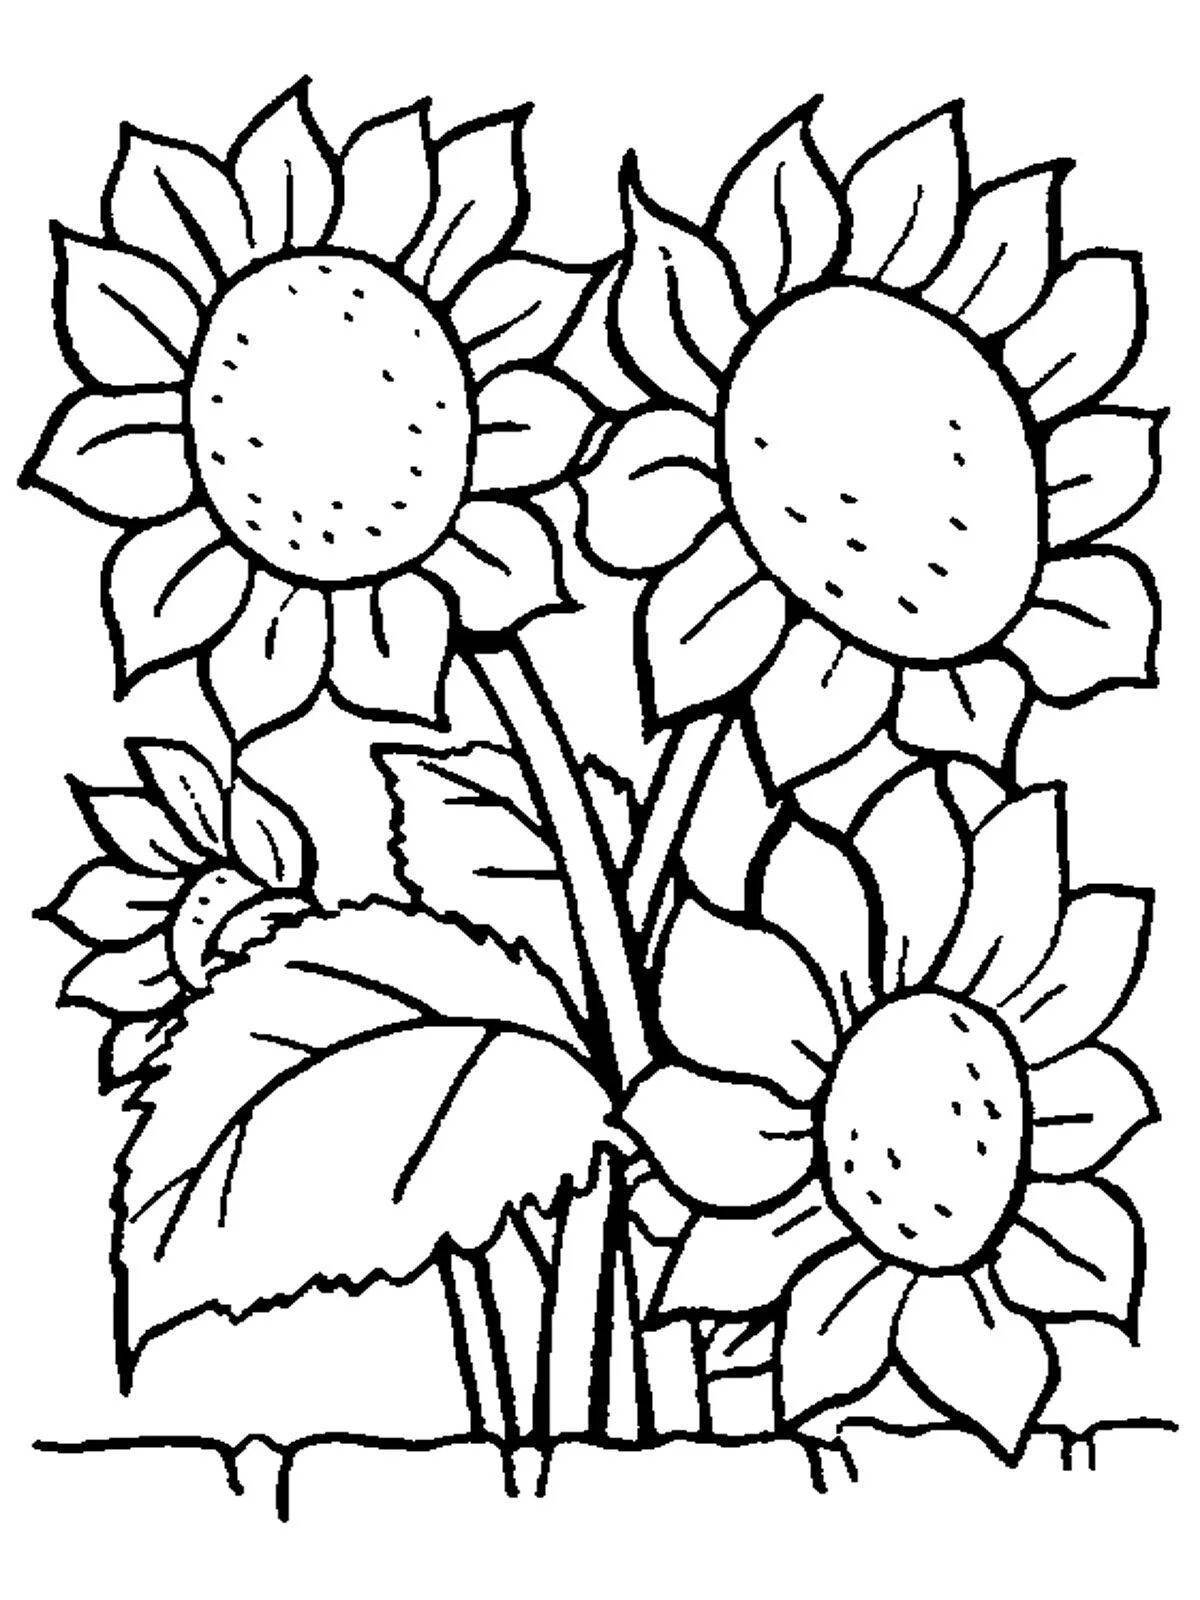 Inspiring flower coloring book for 5-6 year olds